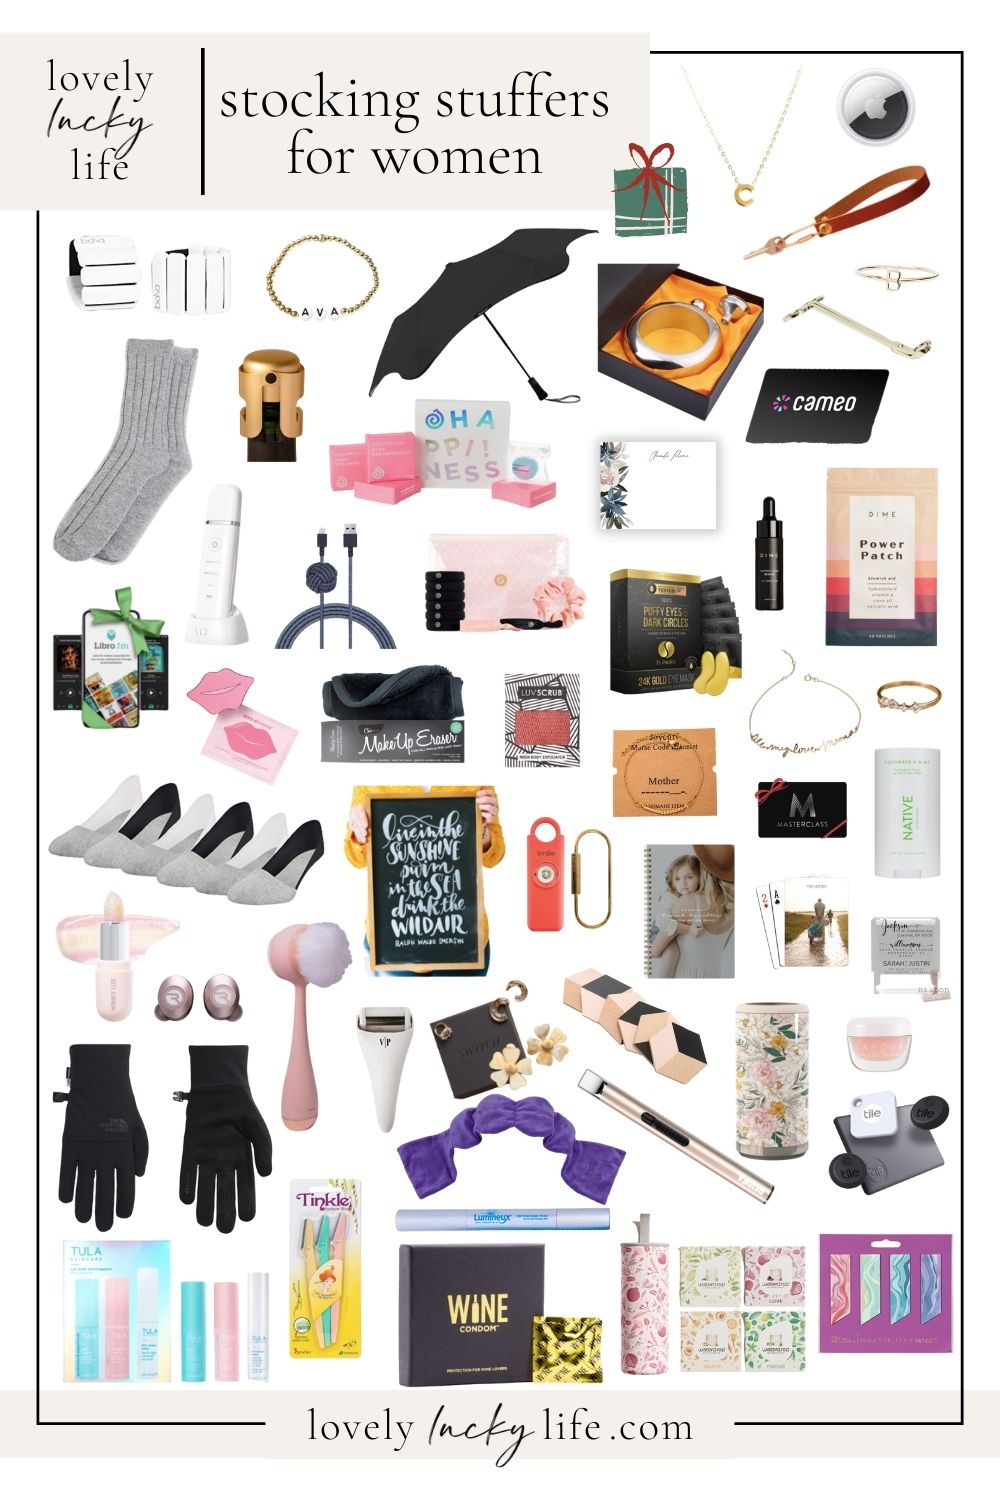 Gift Ideas for Women: My Favorite Things + Wish List - Lovely Lucky Life